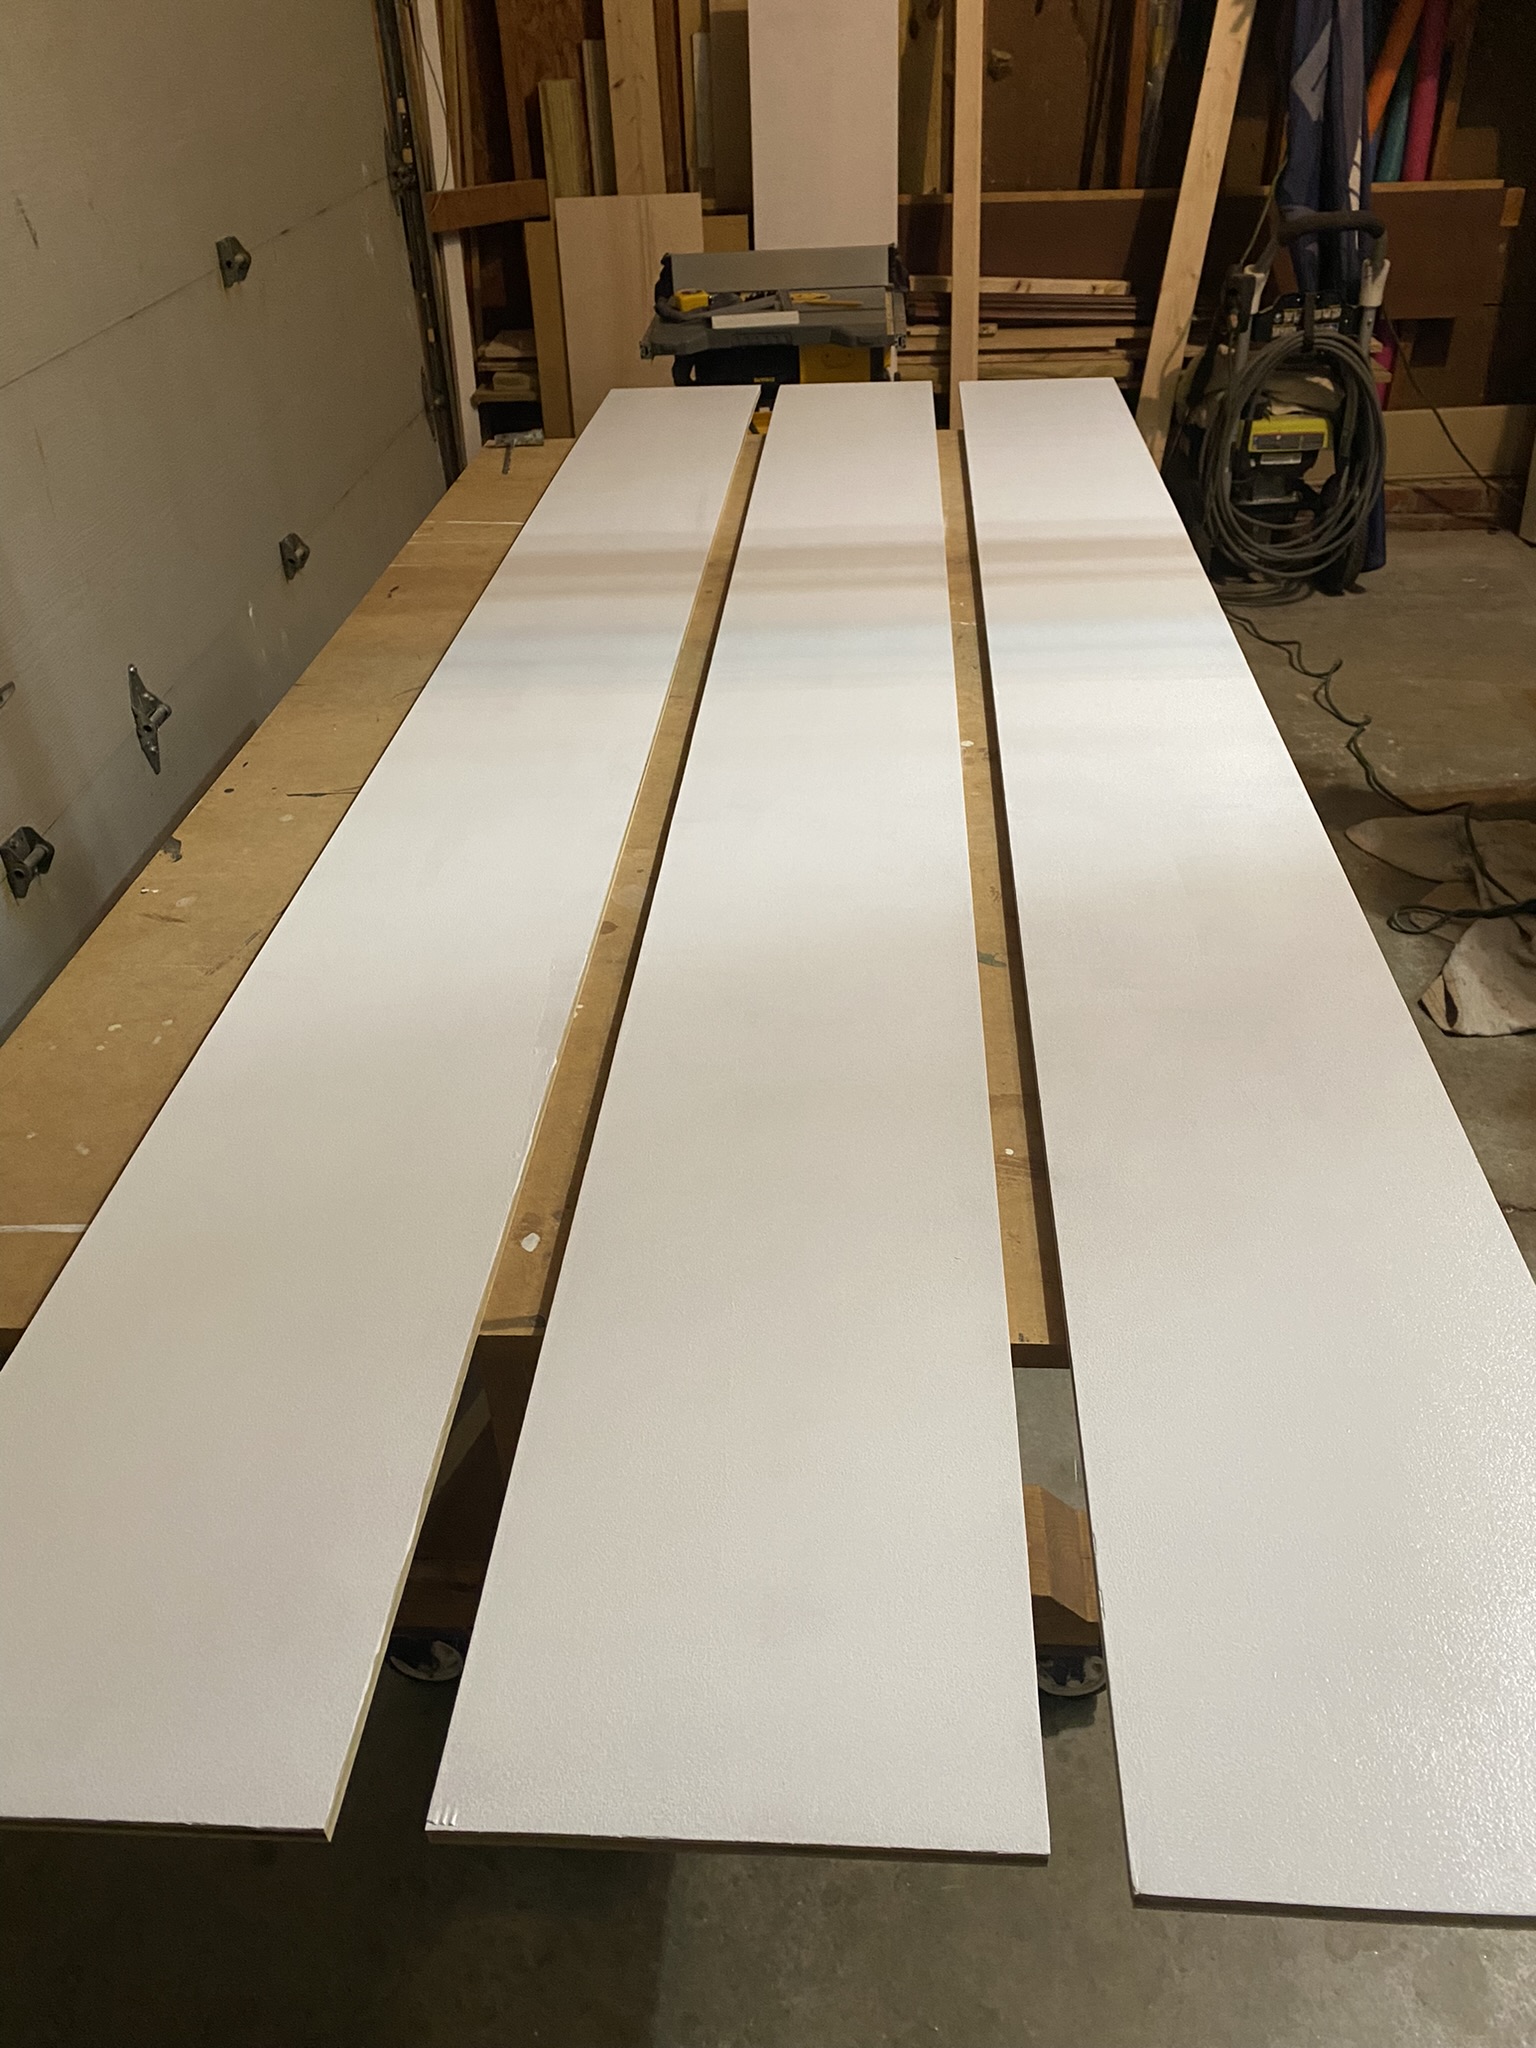 3 wooden panels painted creamy white, drying in a garage.